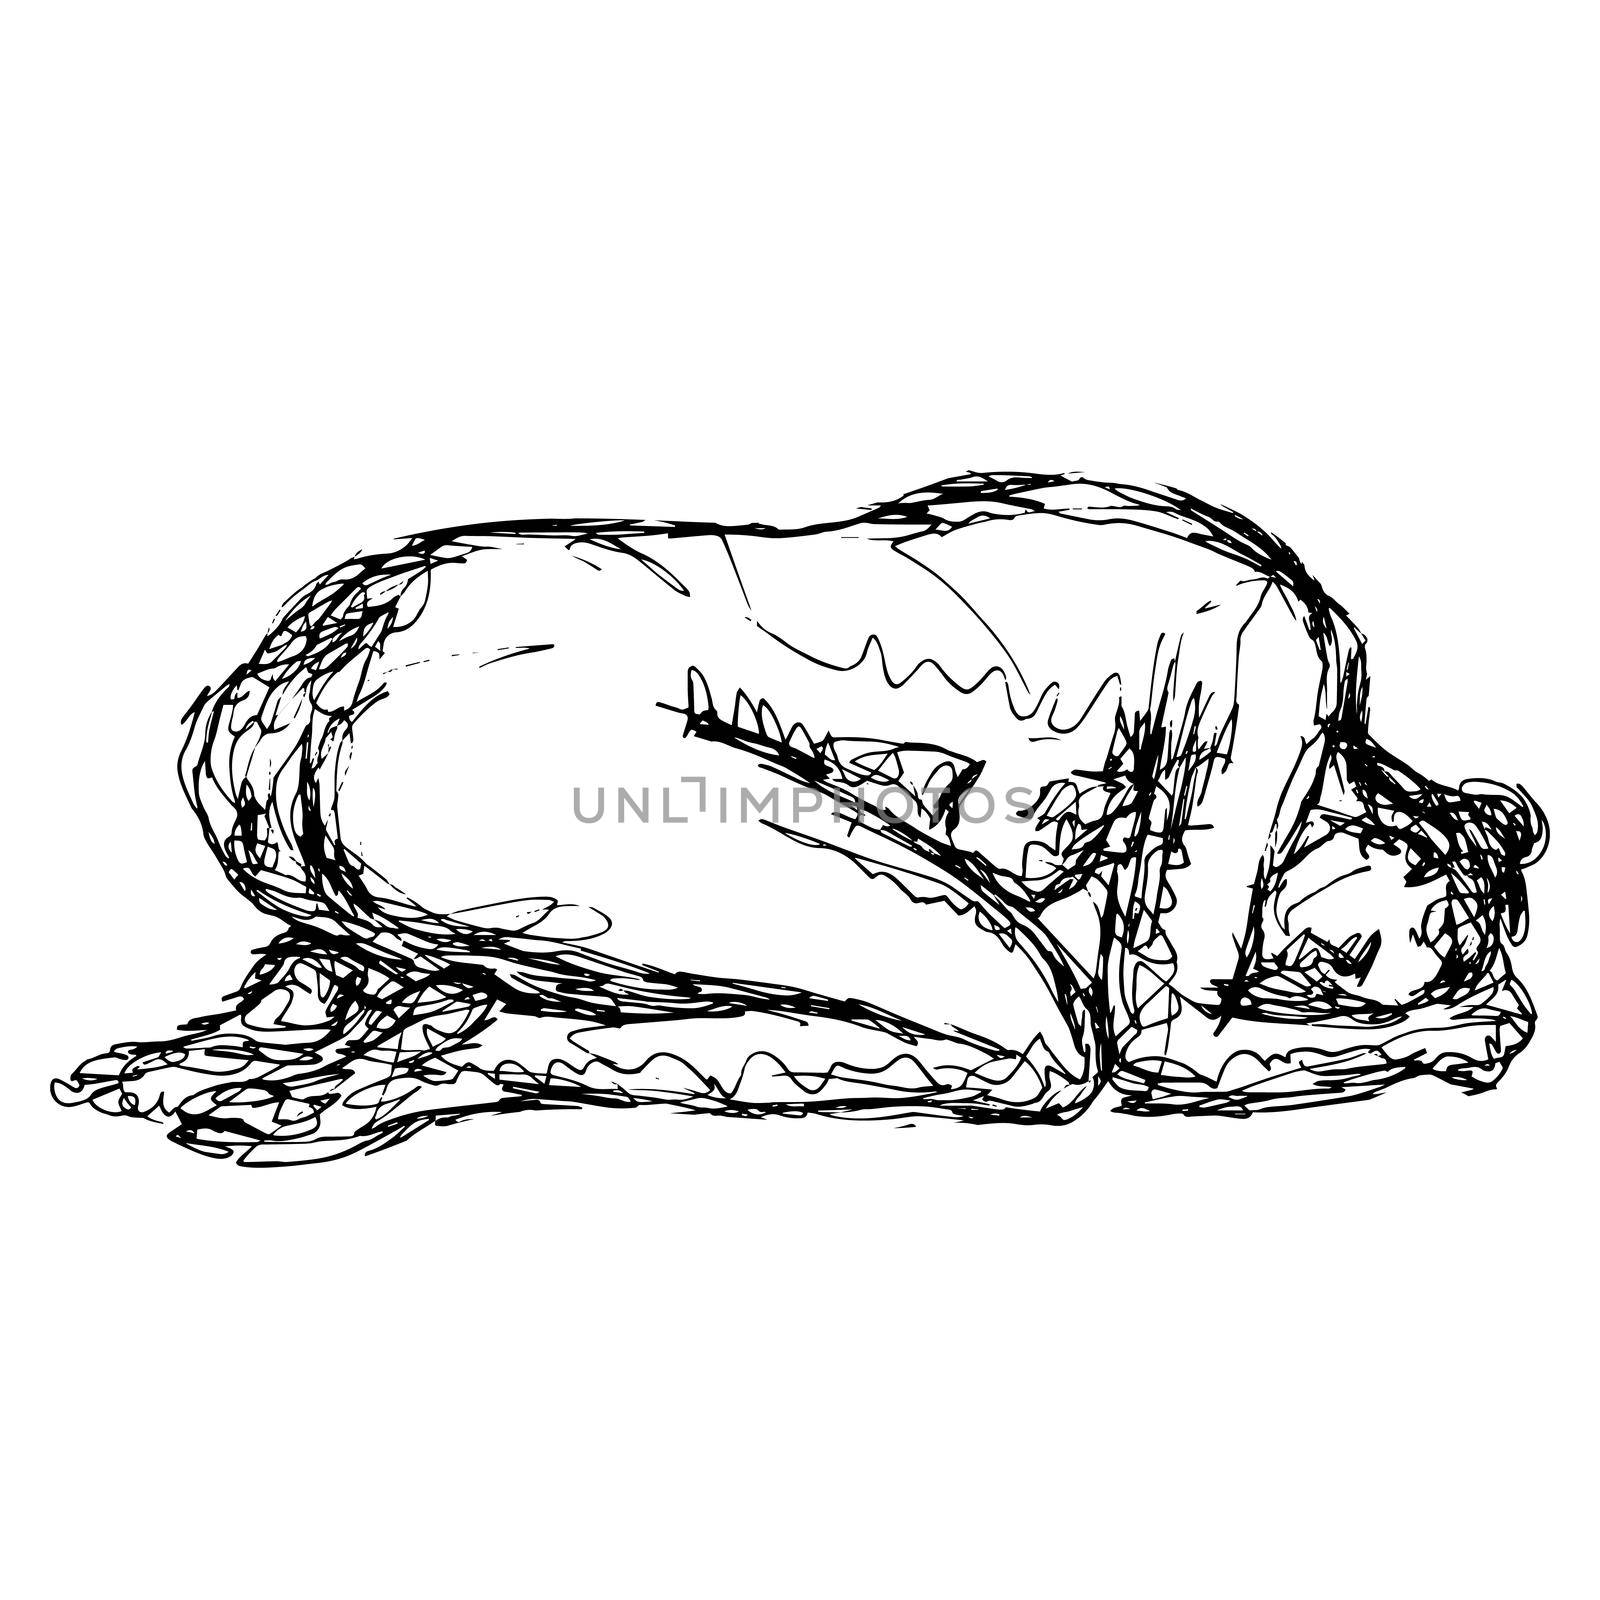 Doodle art illustration of a nude female human figure posing in prone position done in continuous line drawing style in black and white on isolated background.